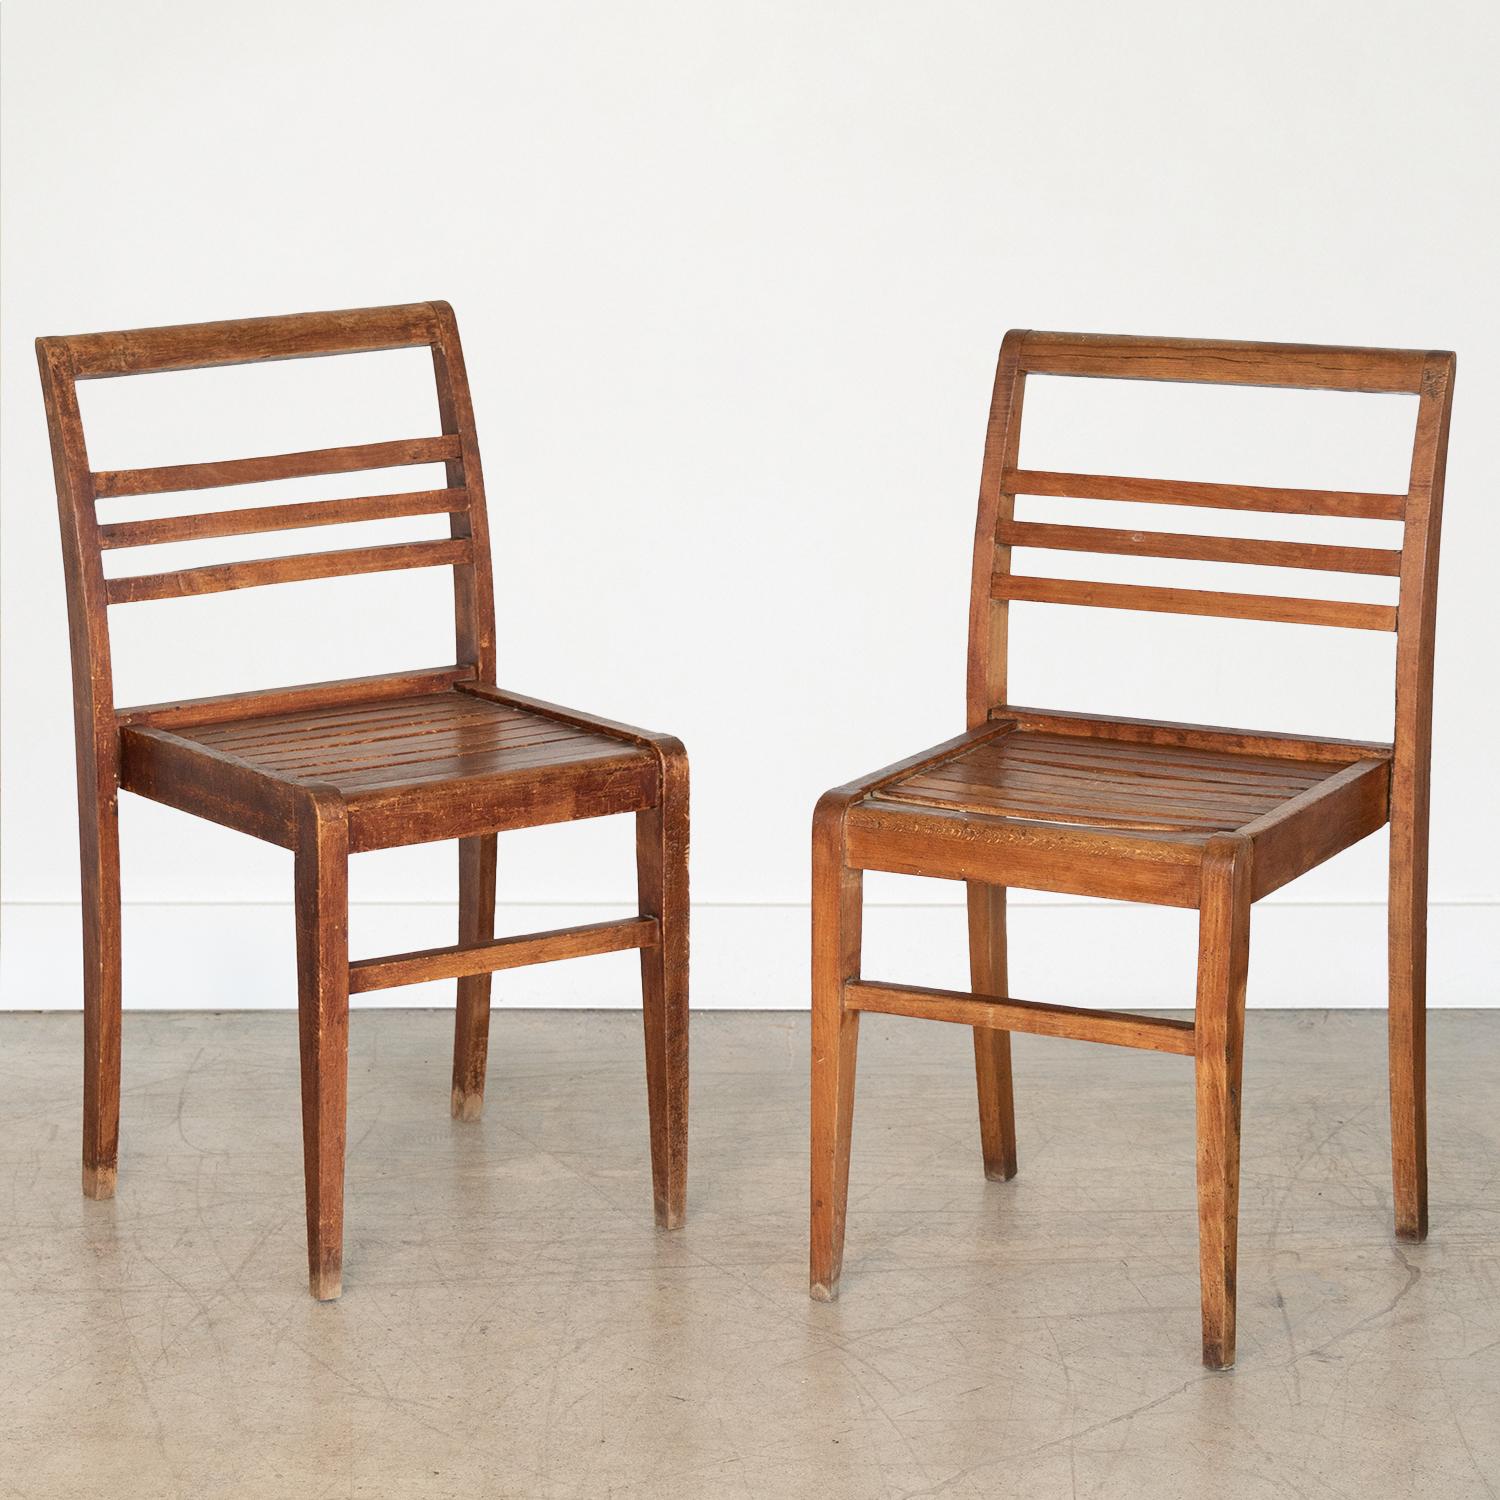 French oak chair designed by René Gabriel in the late 1940's. Two still available, sold and priced individually.